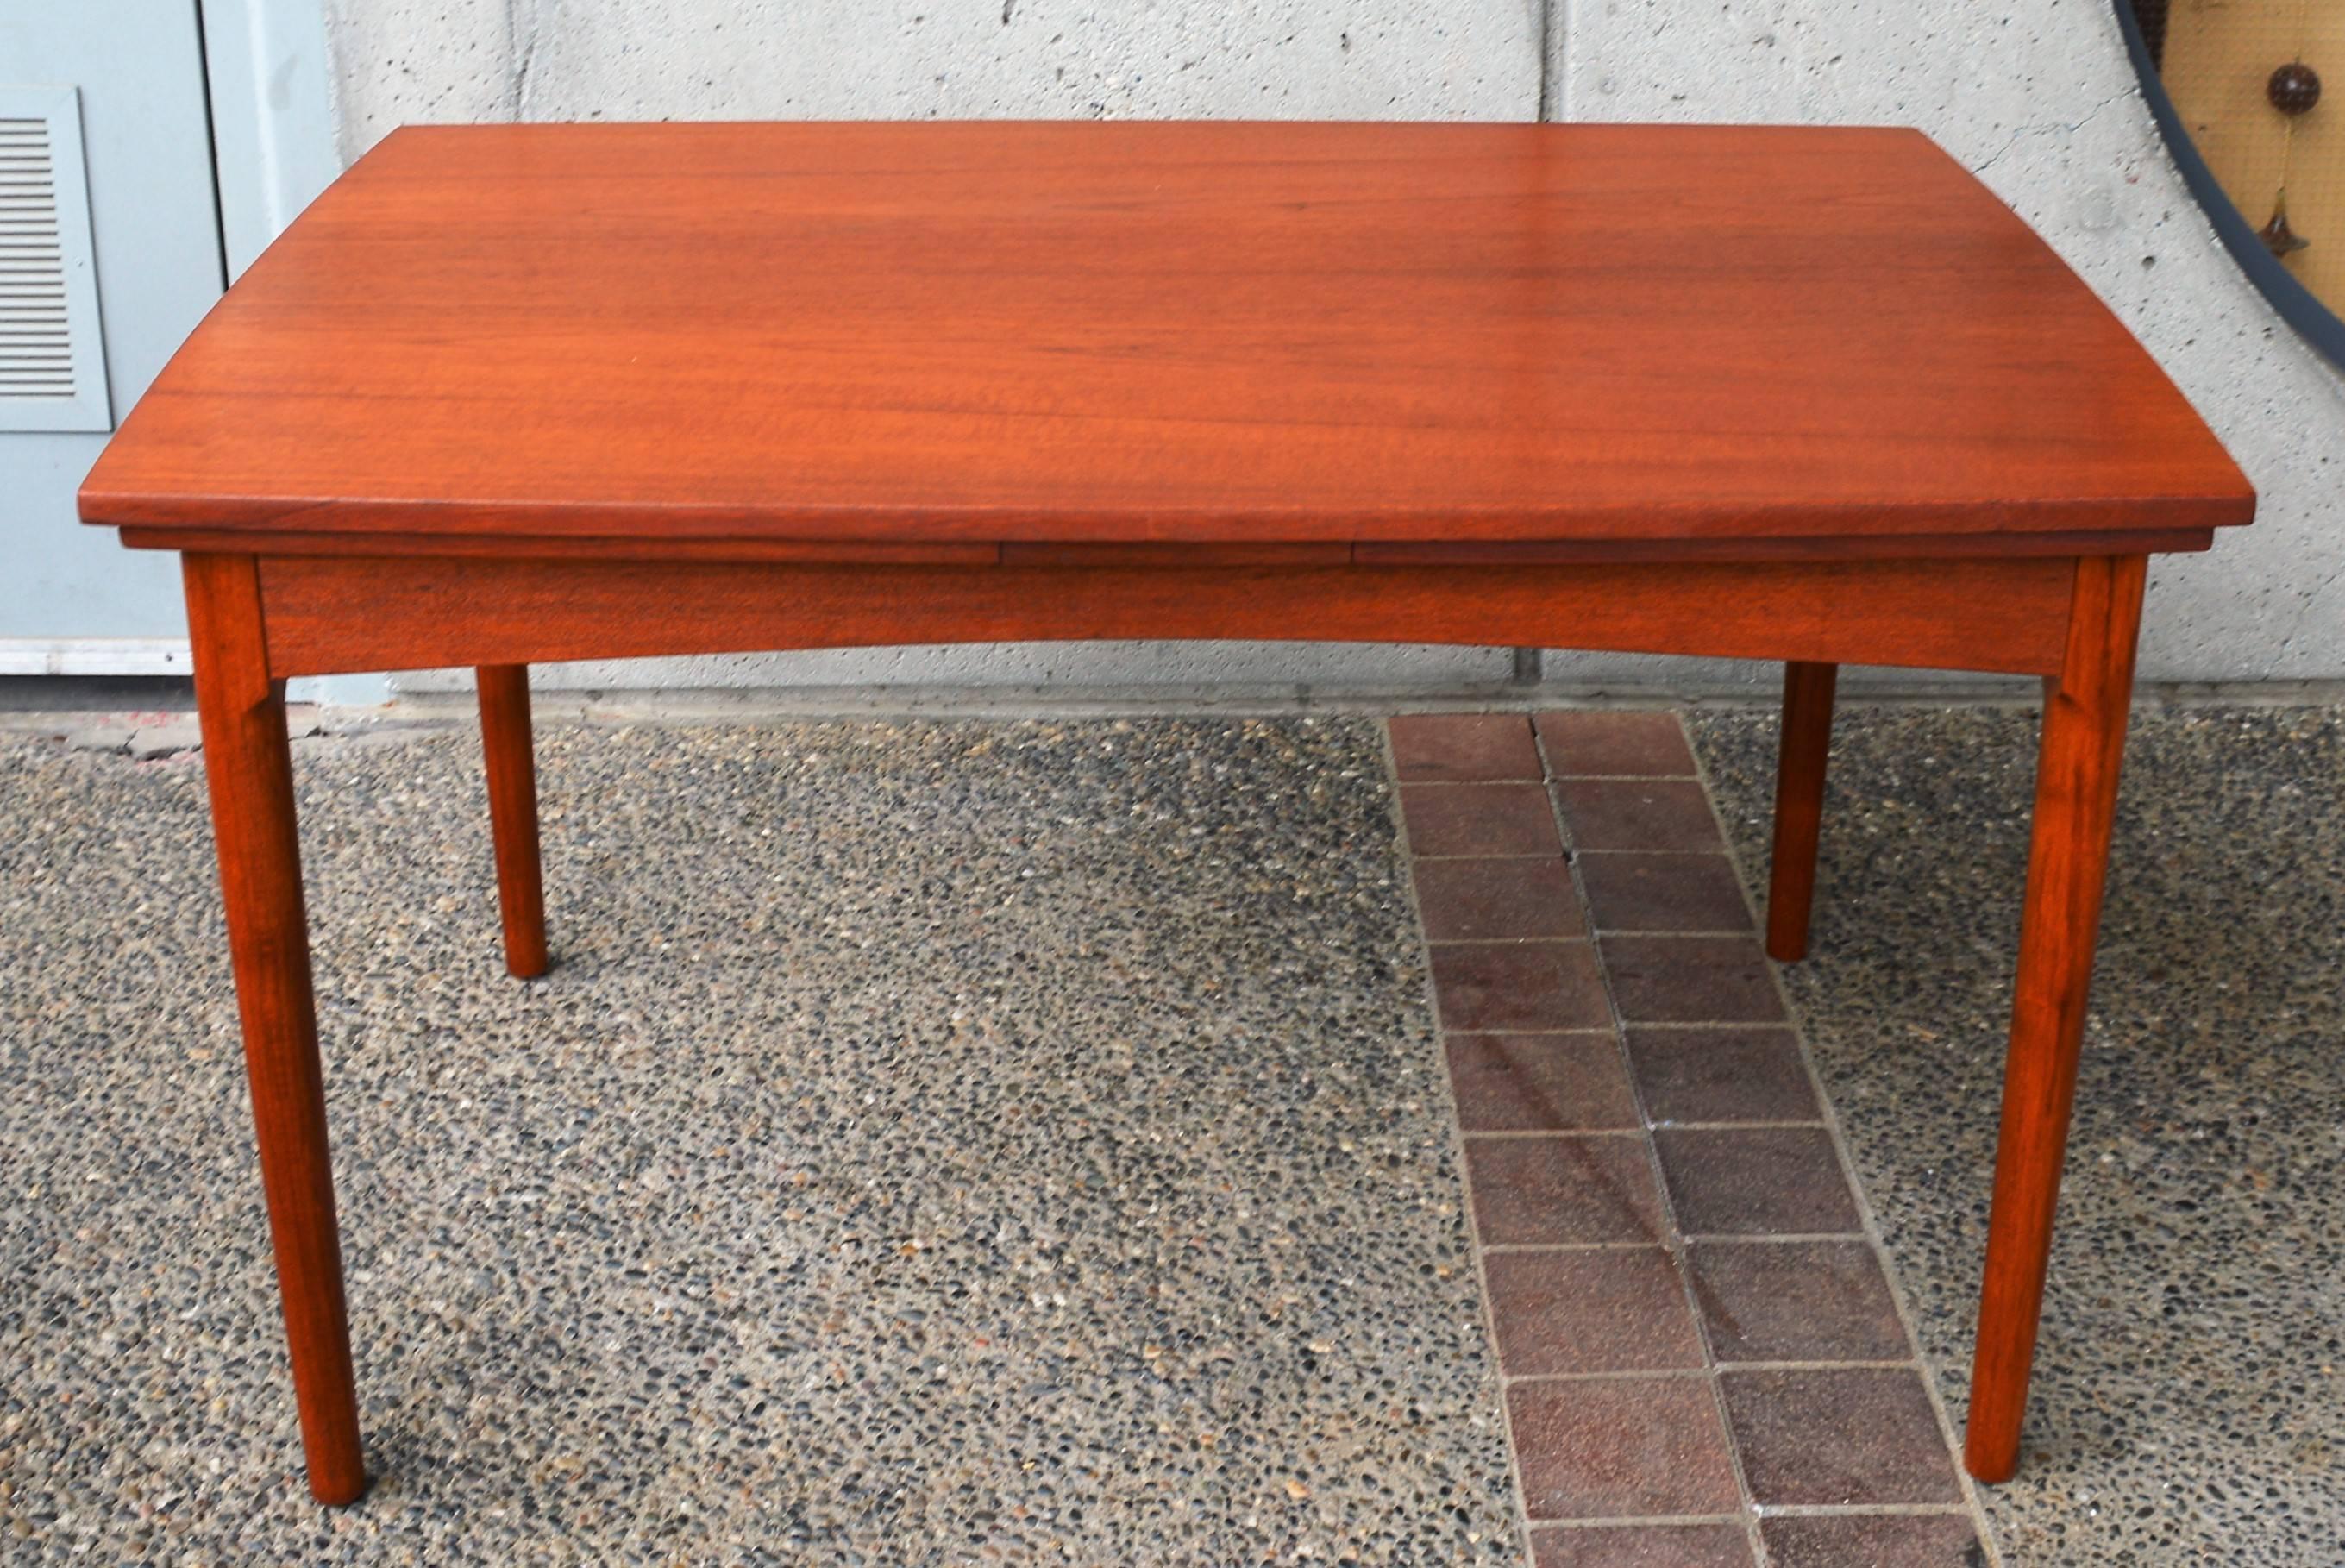 This gorgeous and rare Danish Modern teak quality dining table is an early one by Hundevad & Co. and features all wood construction, a surfboard shape (flares at the center and tapers towards the ends) and two leaves that stow under the table top